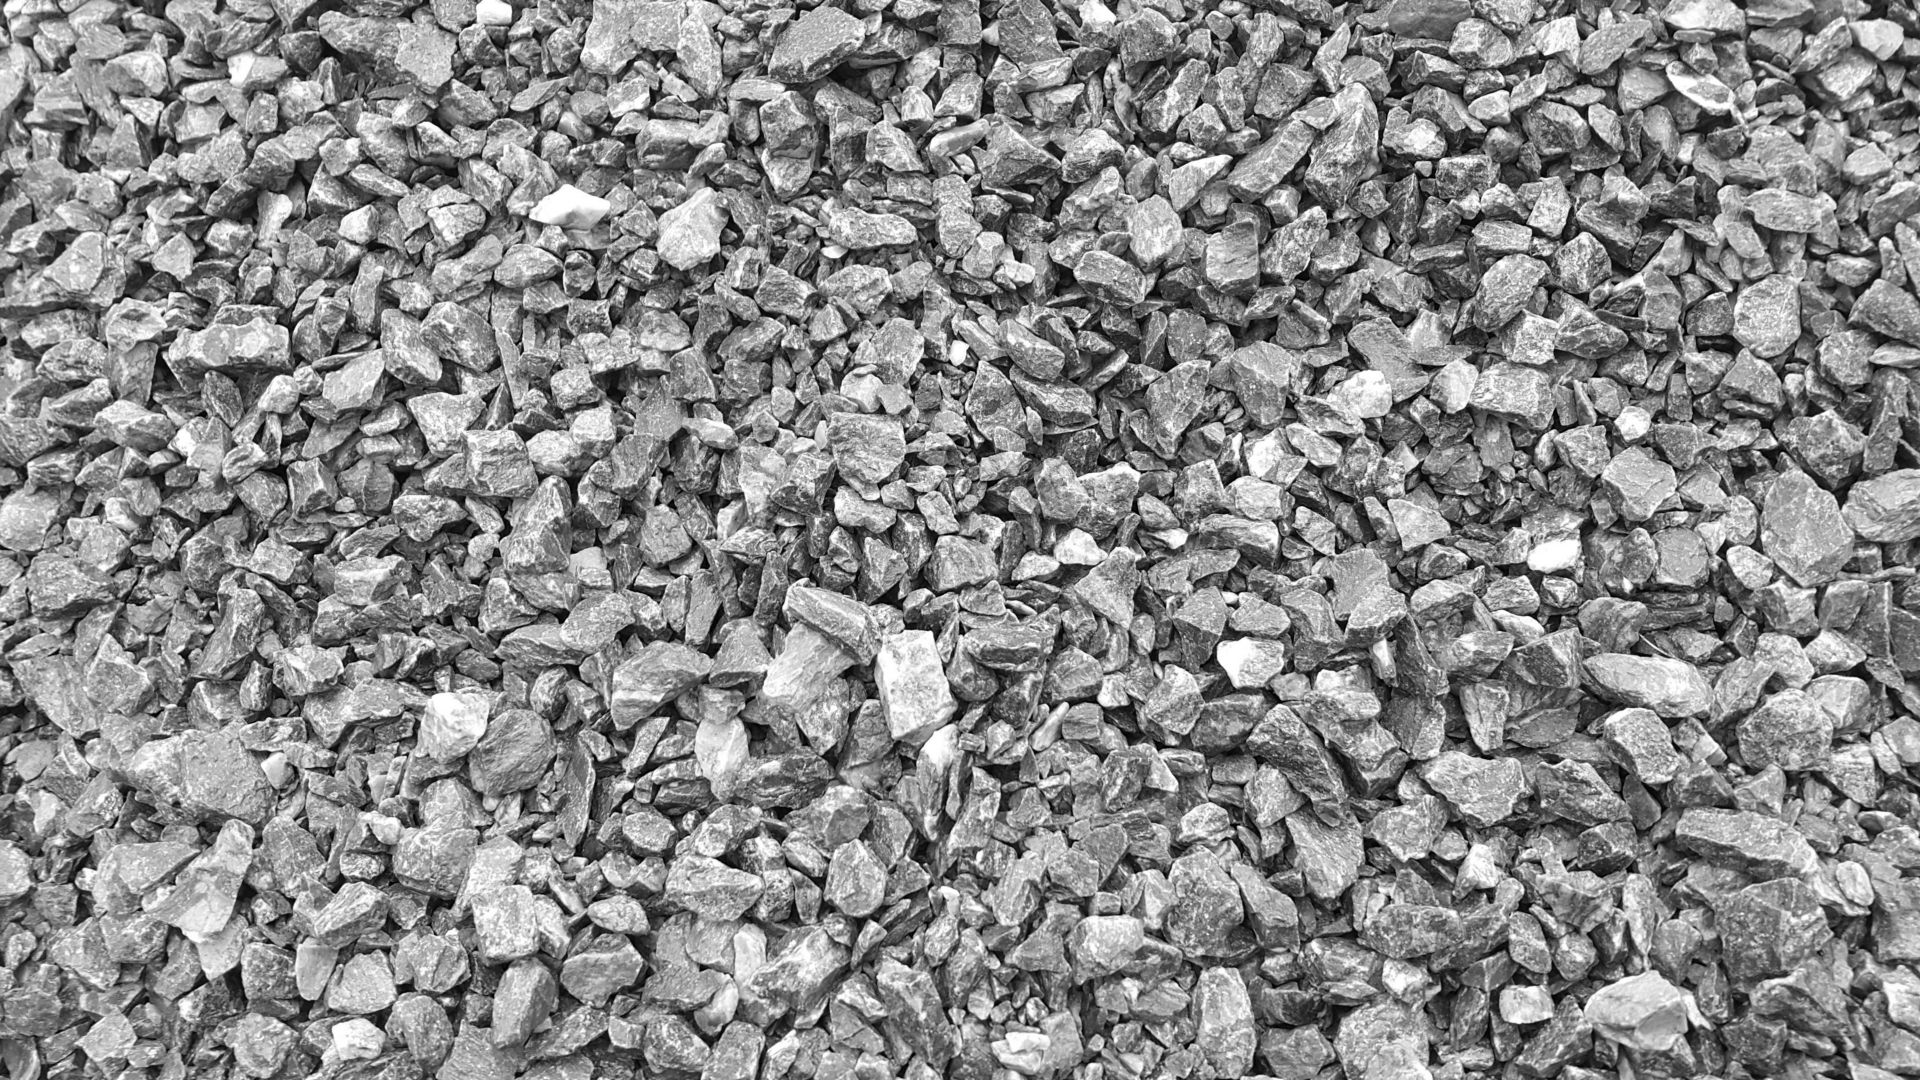 Lime stone coarse aggregate for concrete admixtures